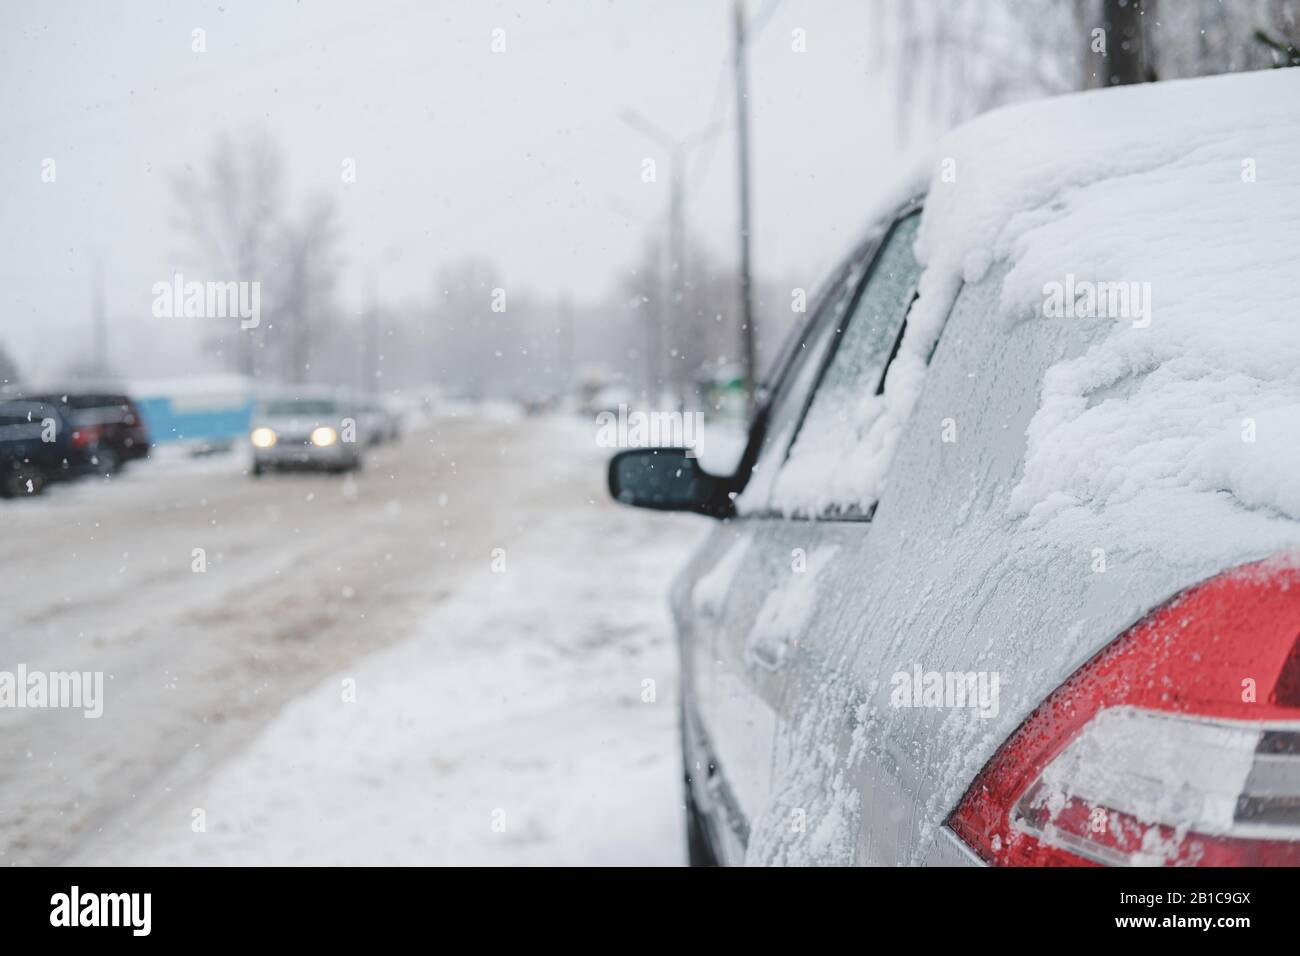 A vehicle covered in snow on the road. Slow traffic in winter storm, road filled with wet snow Stock Photo